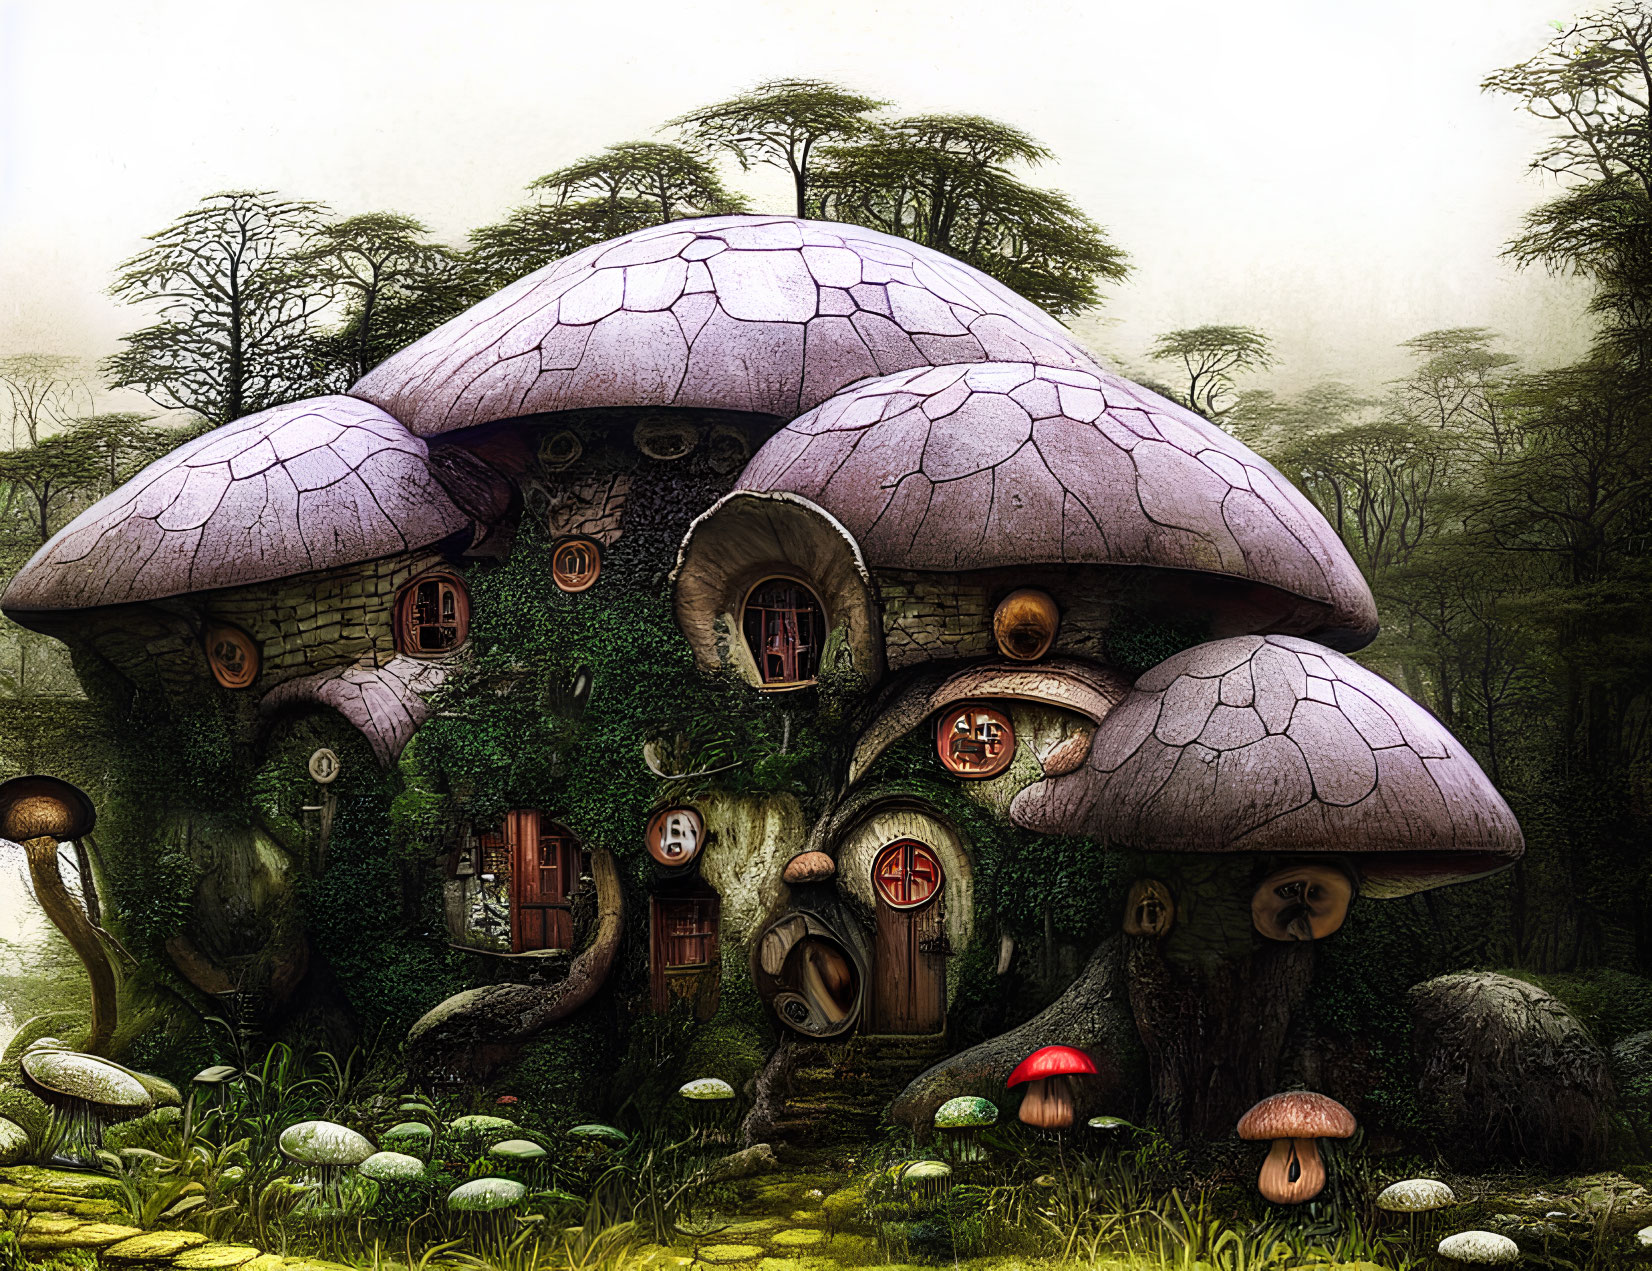 Illustration of Mushroom-Shaped House in Mystical Forest